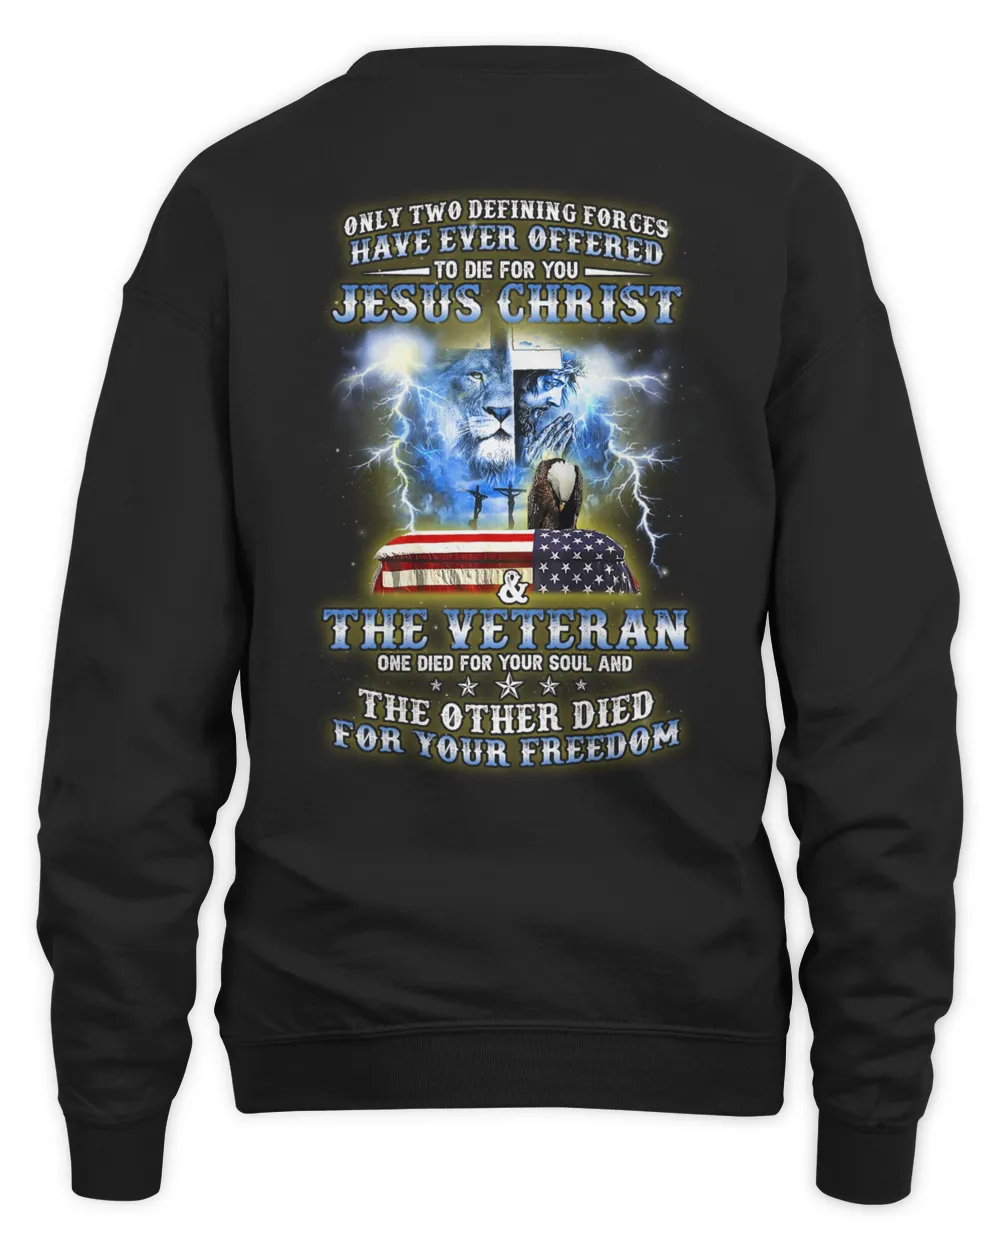 Only Two Defining Forces Have Ever Offered To Die For You Jesus Christ And The Veteran